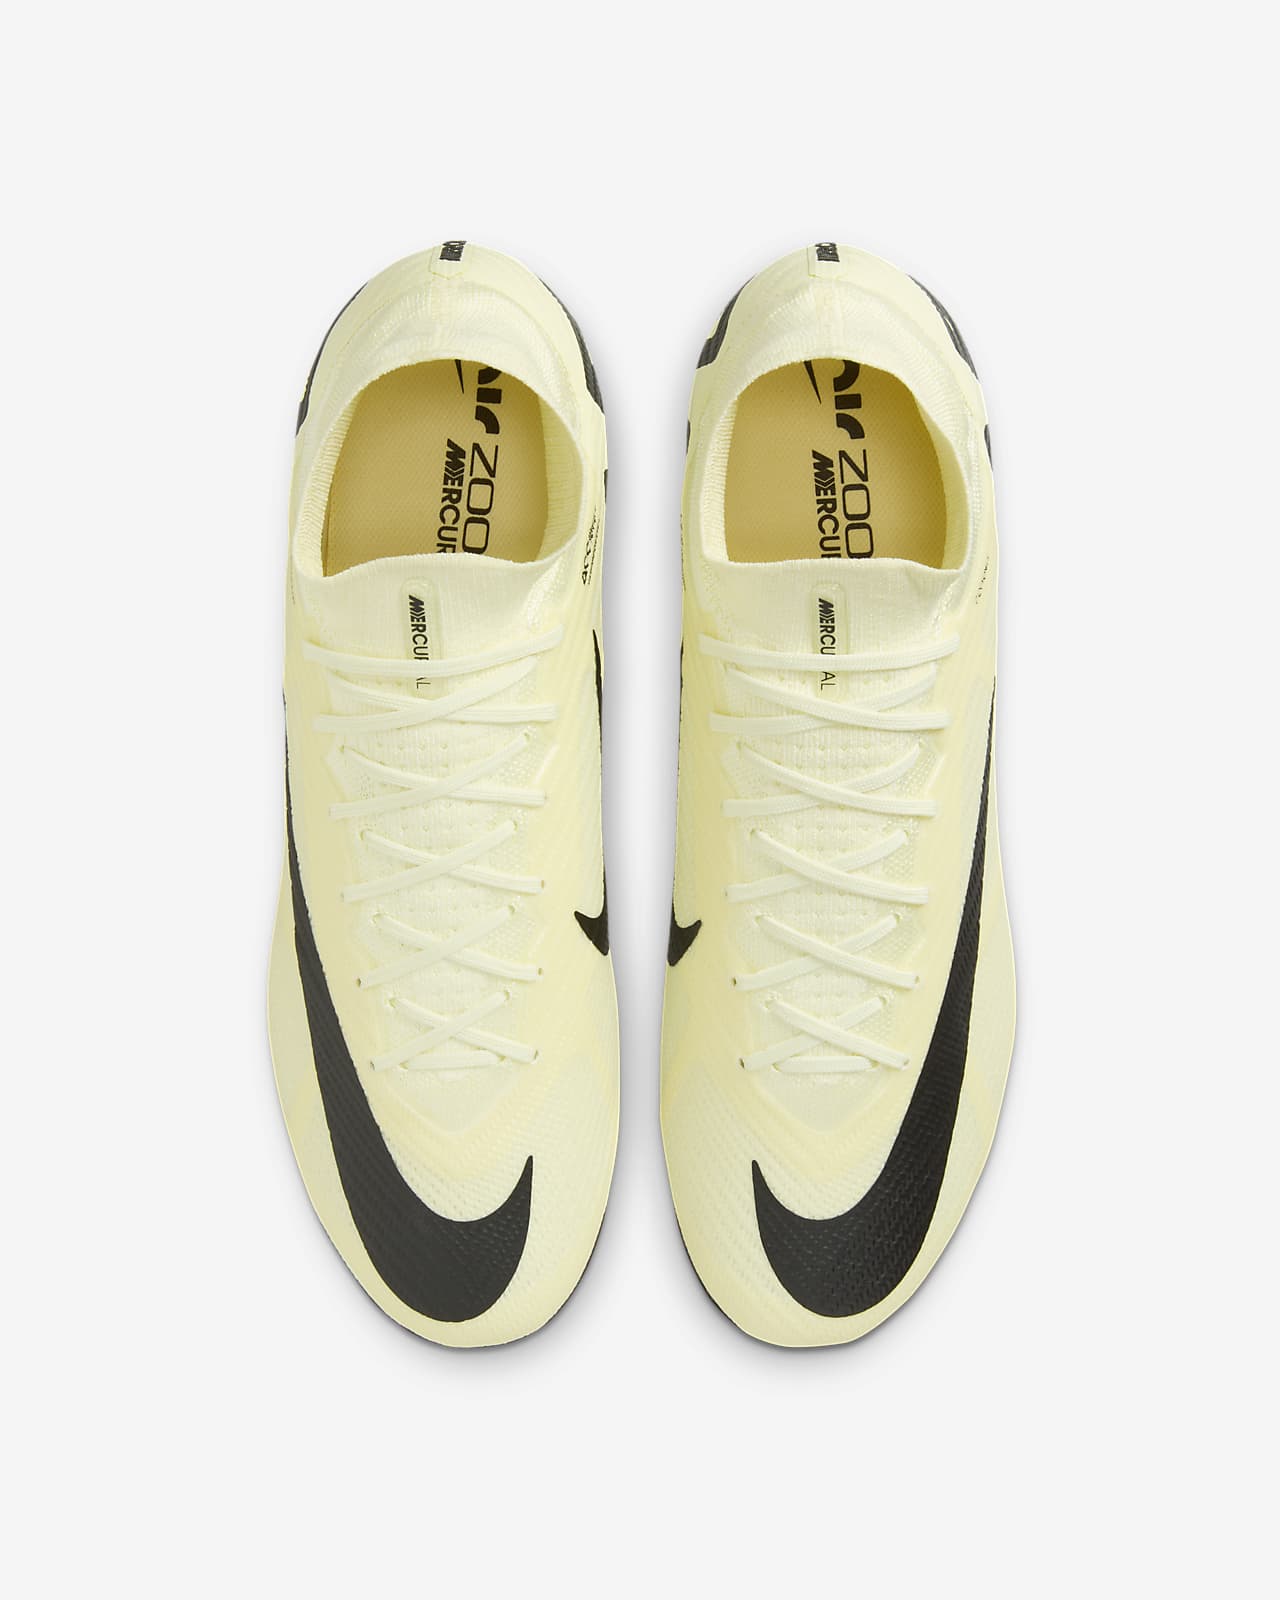 Nike Mercurial Superfly 9 Elite Soft-Ground High-Top Football Boot